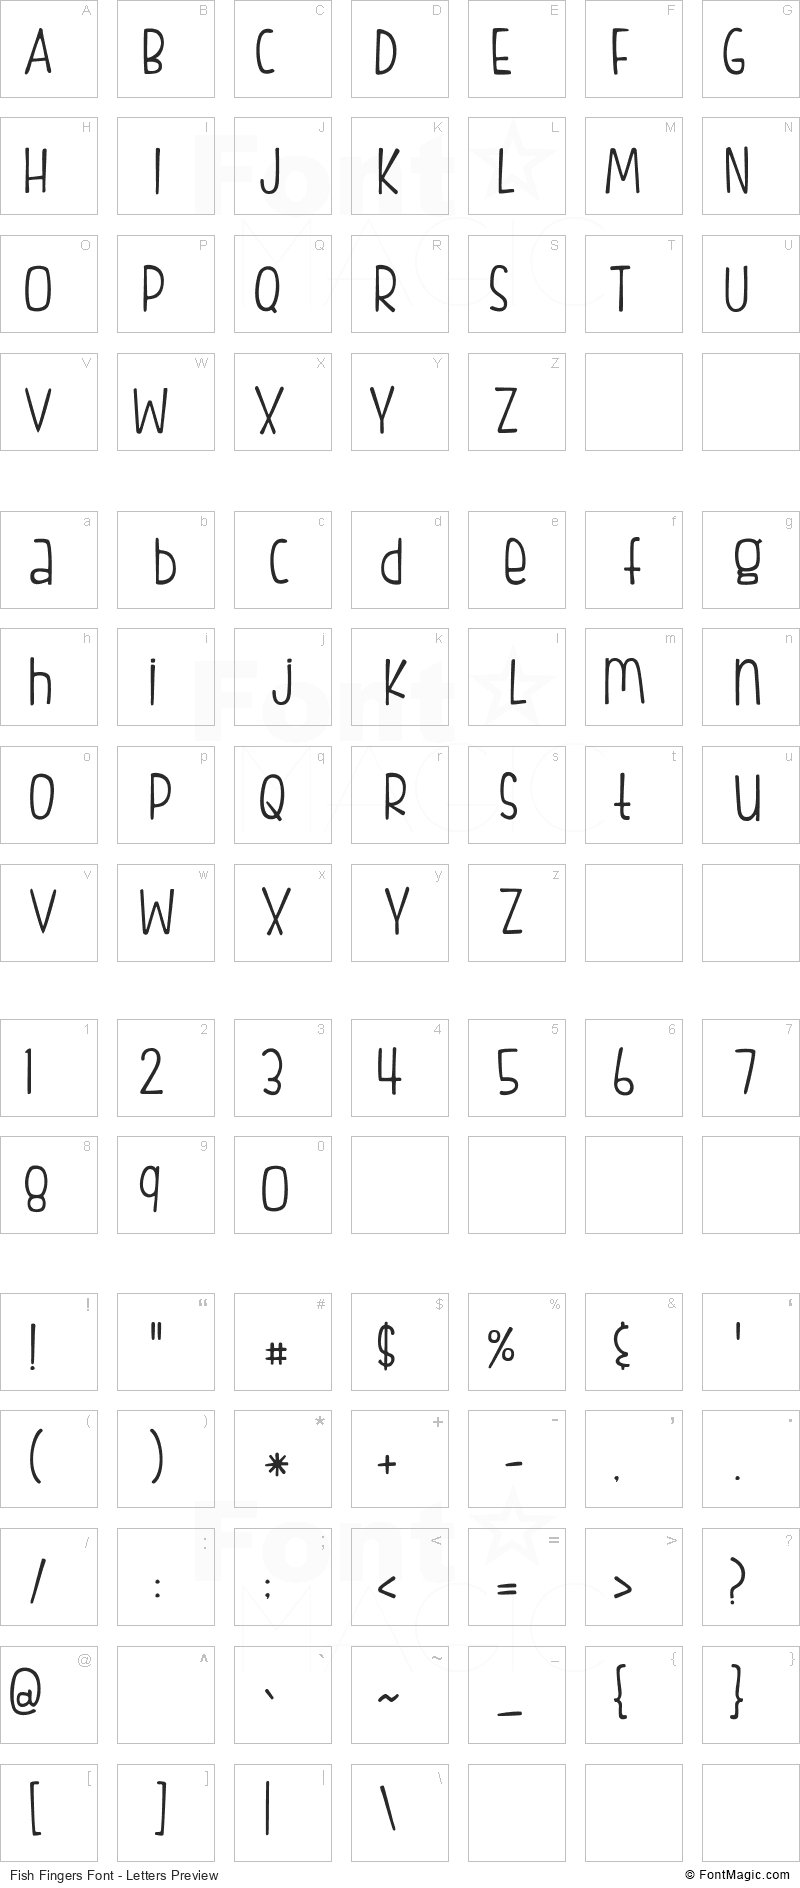 Fish Fingers Font - All Latters Preview Chart